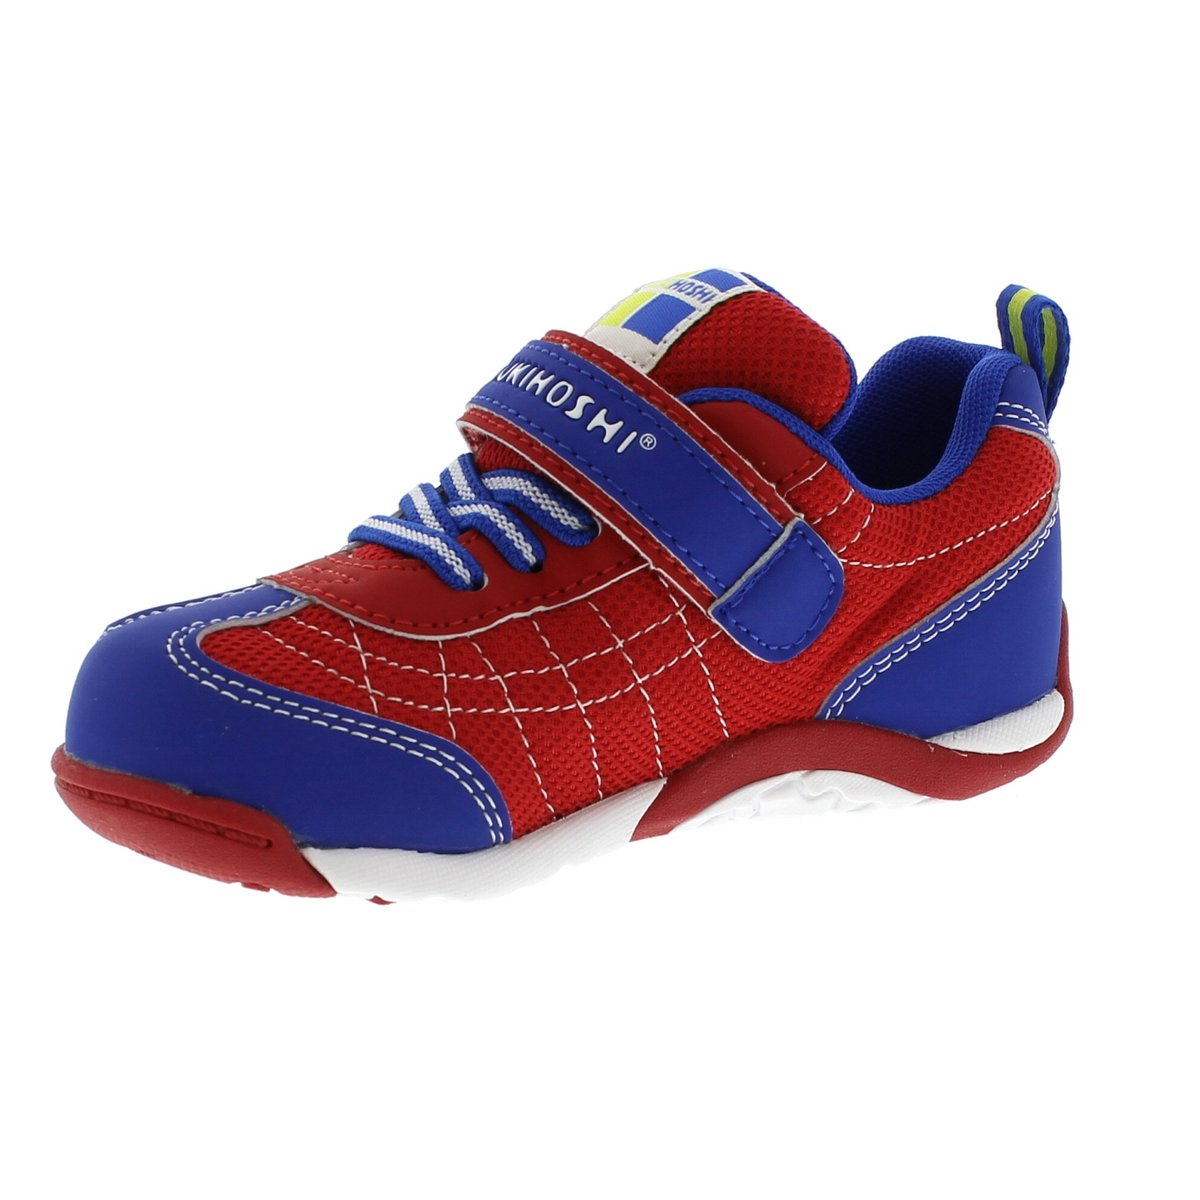 Child Tsukihoshi Kaz Sneaker in Red/Royal from the front view